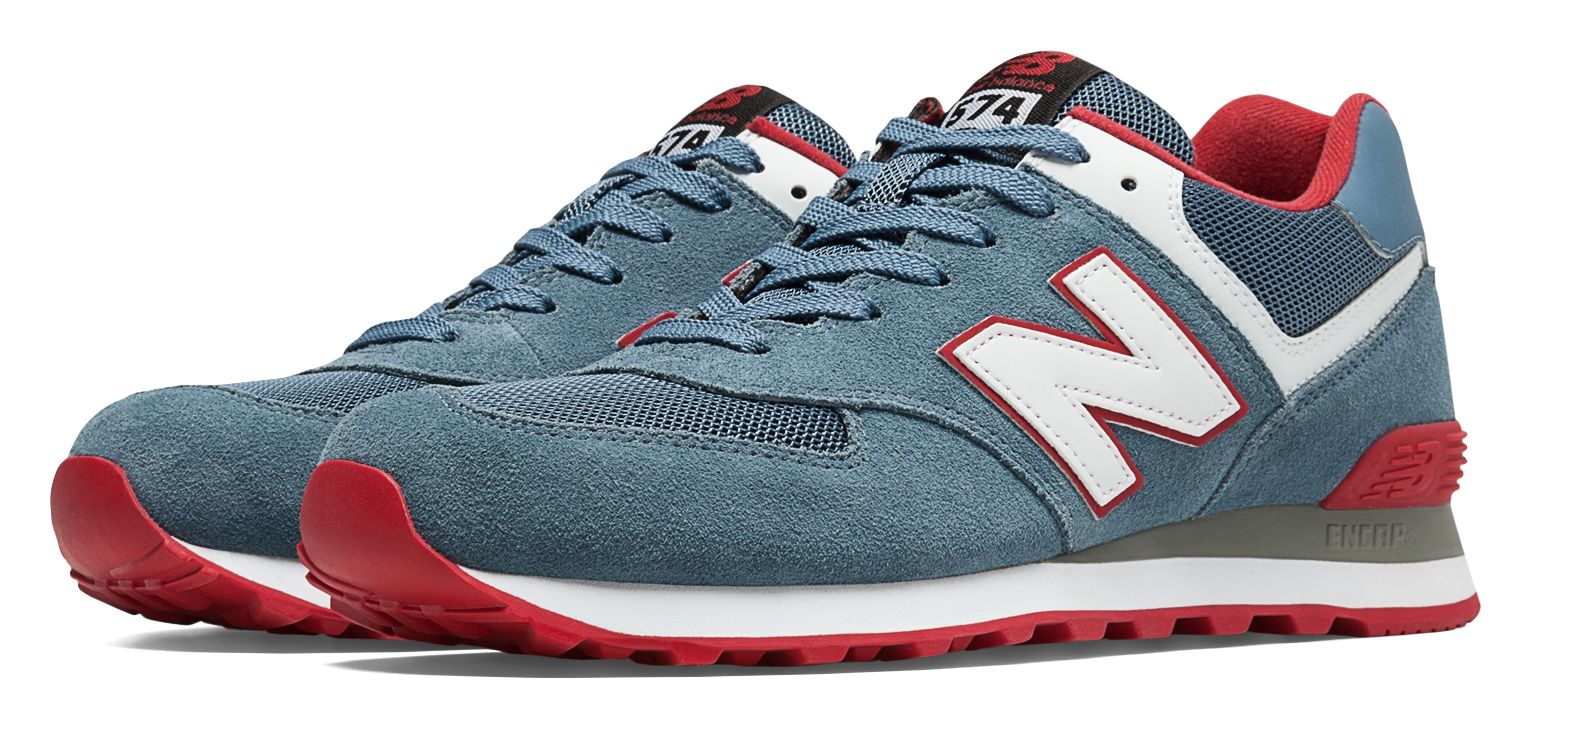 New Balance ML574-C on Sale - Discounts Up to 13% Off on ML574CPI at Joe's  New Balance Outlet